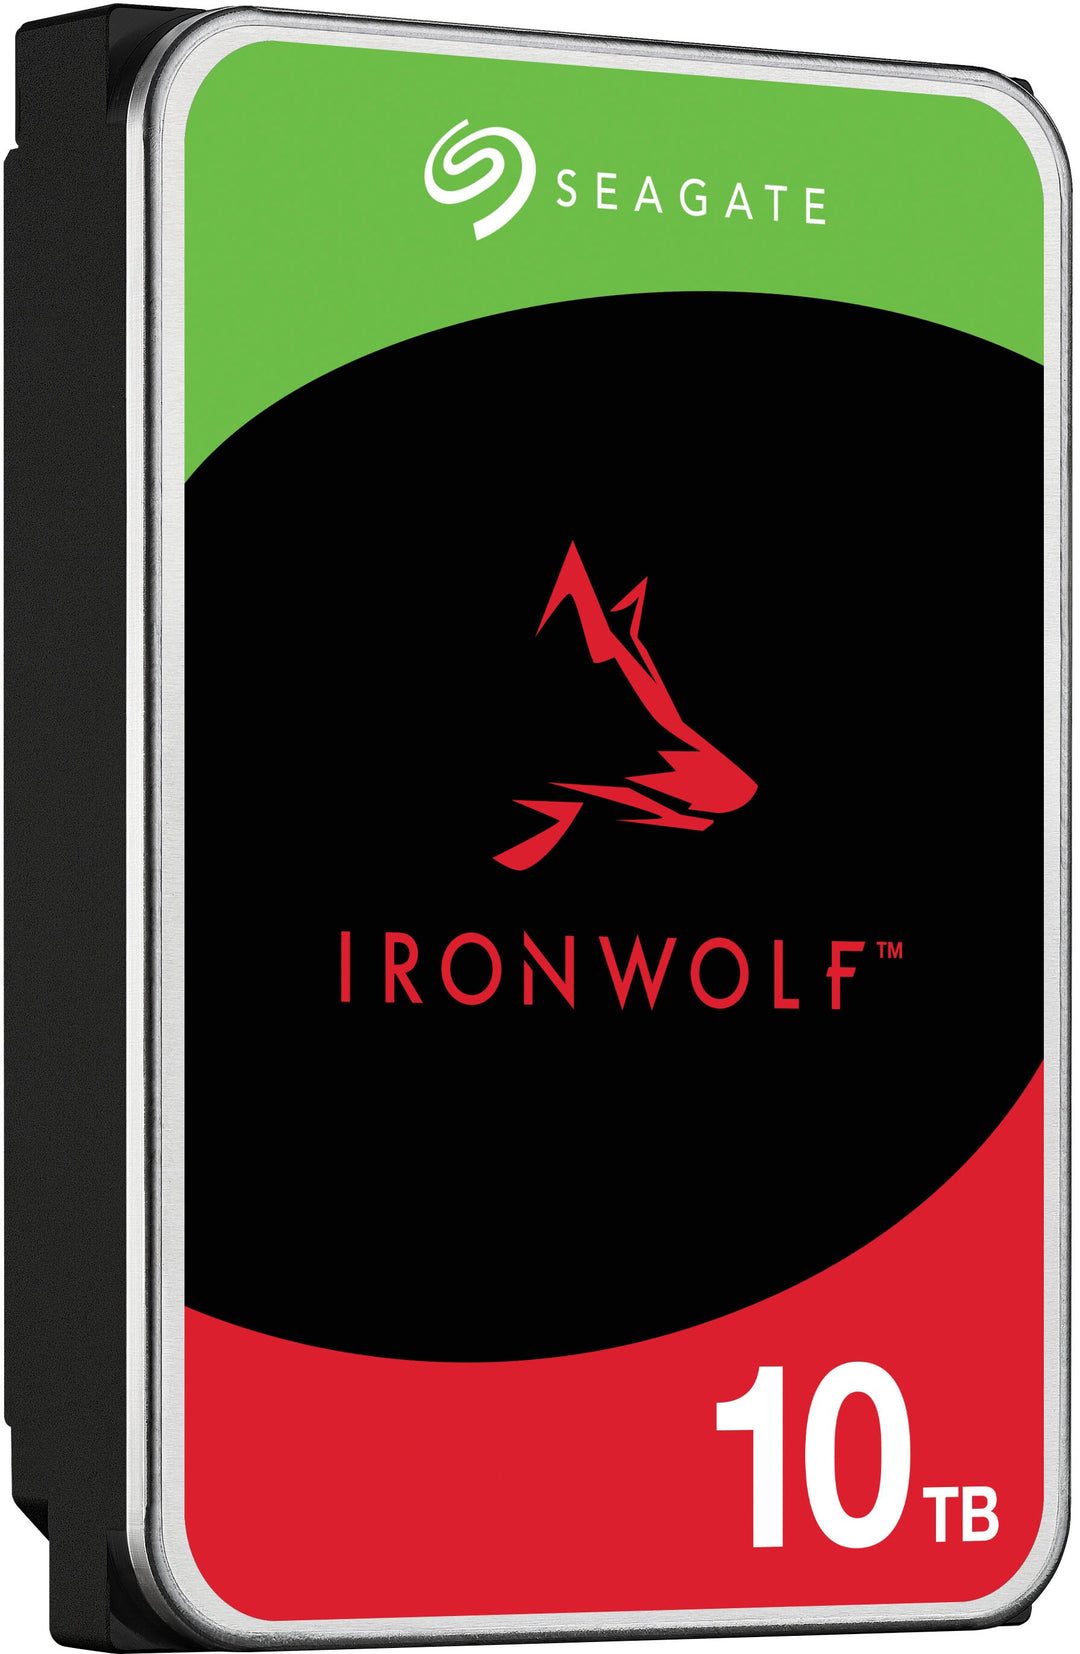 Seagate - IronWolf 10TB Internal SATA NAS Hard Drive with Rescue Data Recovery Services_1